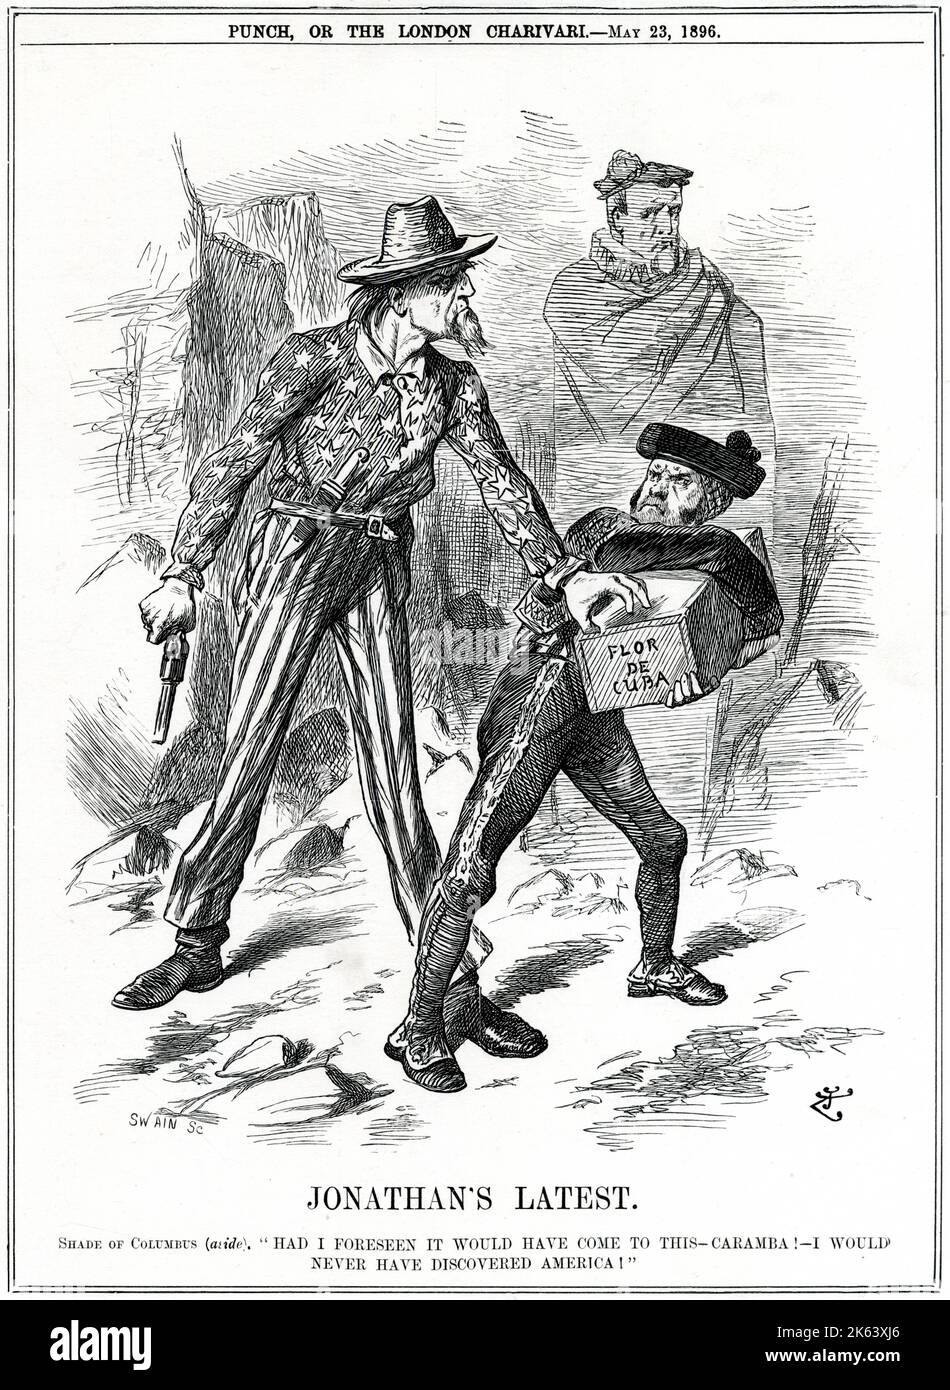 'Shade of Columbus (aside): &quot;Had I forseen it would have come to this -Caramba! - I would never have discovered America!&quot;    A tall man with a scraggly bear and hat, wearing striped trousers and a shirt covered in stars (meant to represent America), holds a gun and reaches towards a box labelled 'Flor de Cuba'. A shorter man with a full beard, wearing a Spanish matador outfit (representing Spain), clutches the box as he leans away from the other mans hand. Columbus as a ghost stands in the background looking on. This is a satirical cartoon for Punch Magazine about American interventi Stock Photo